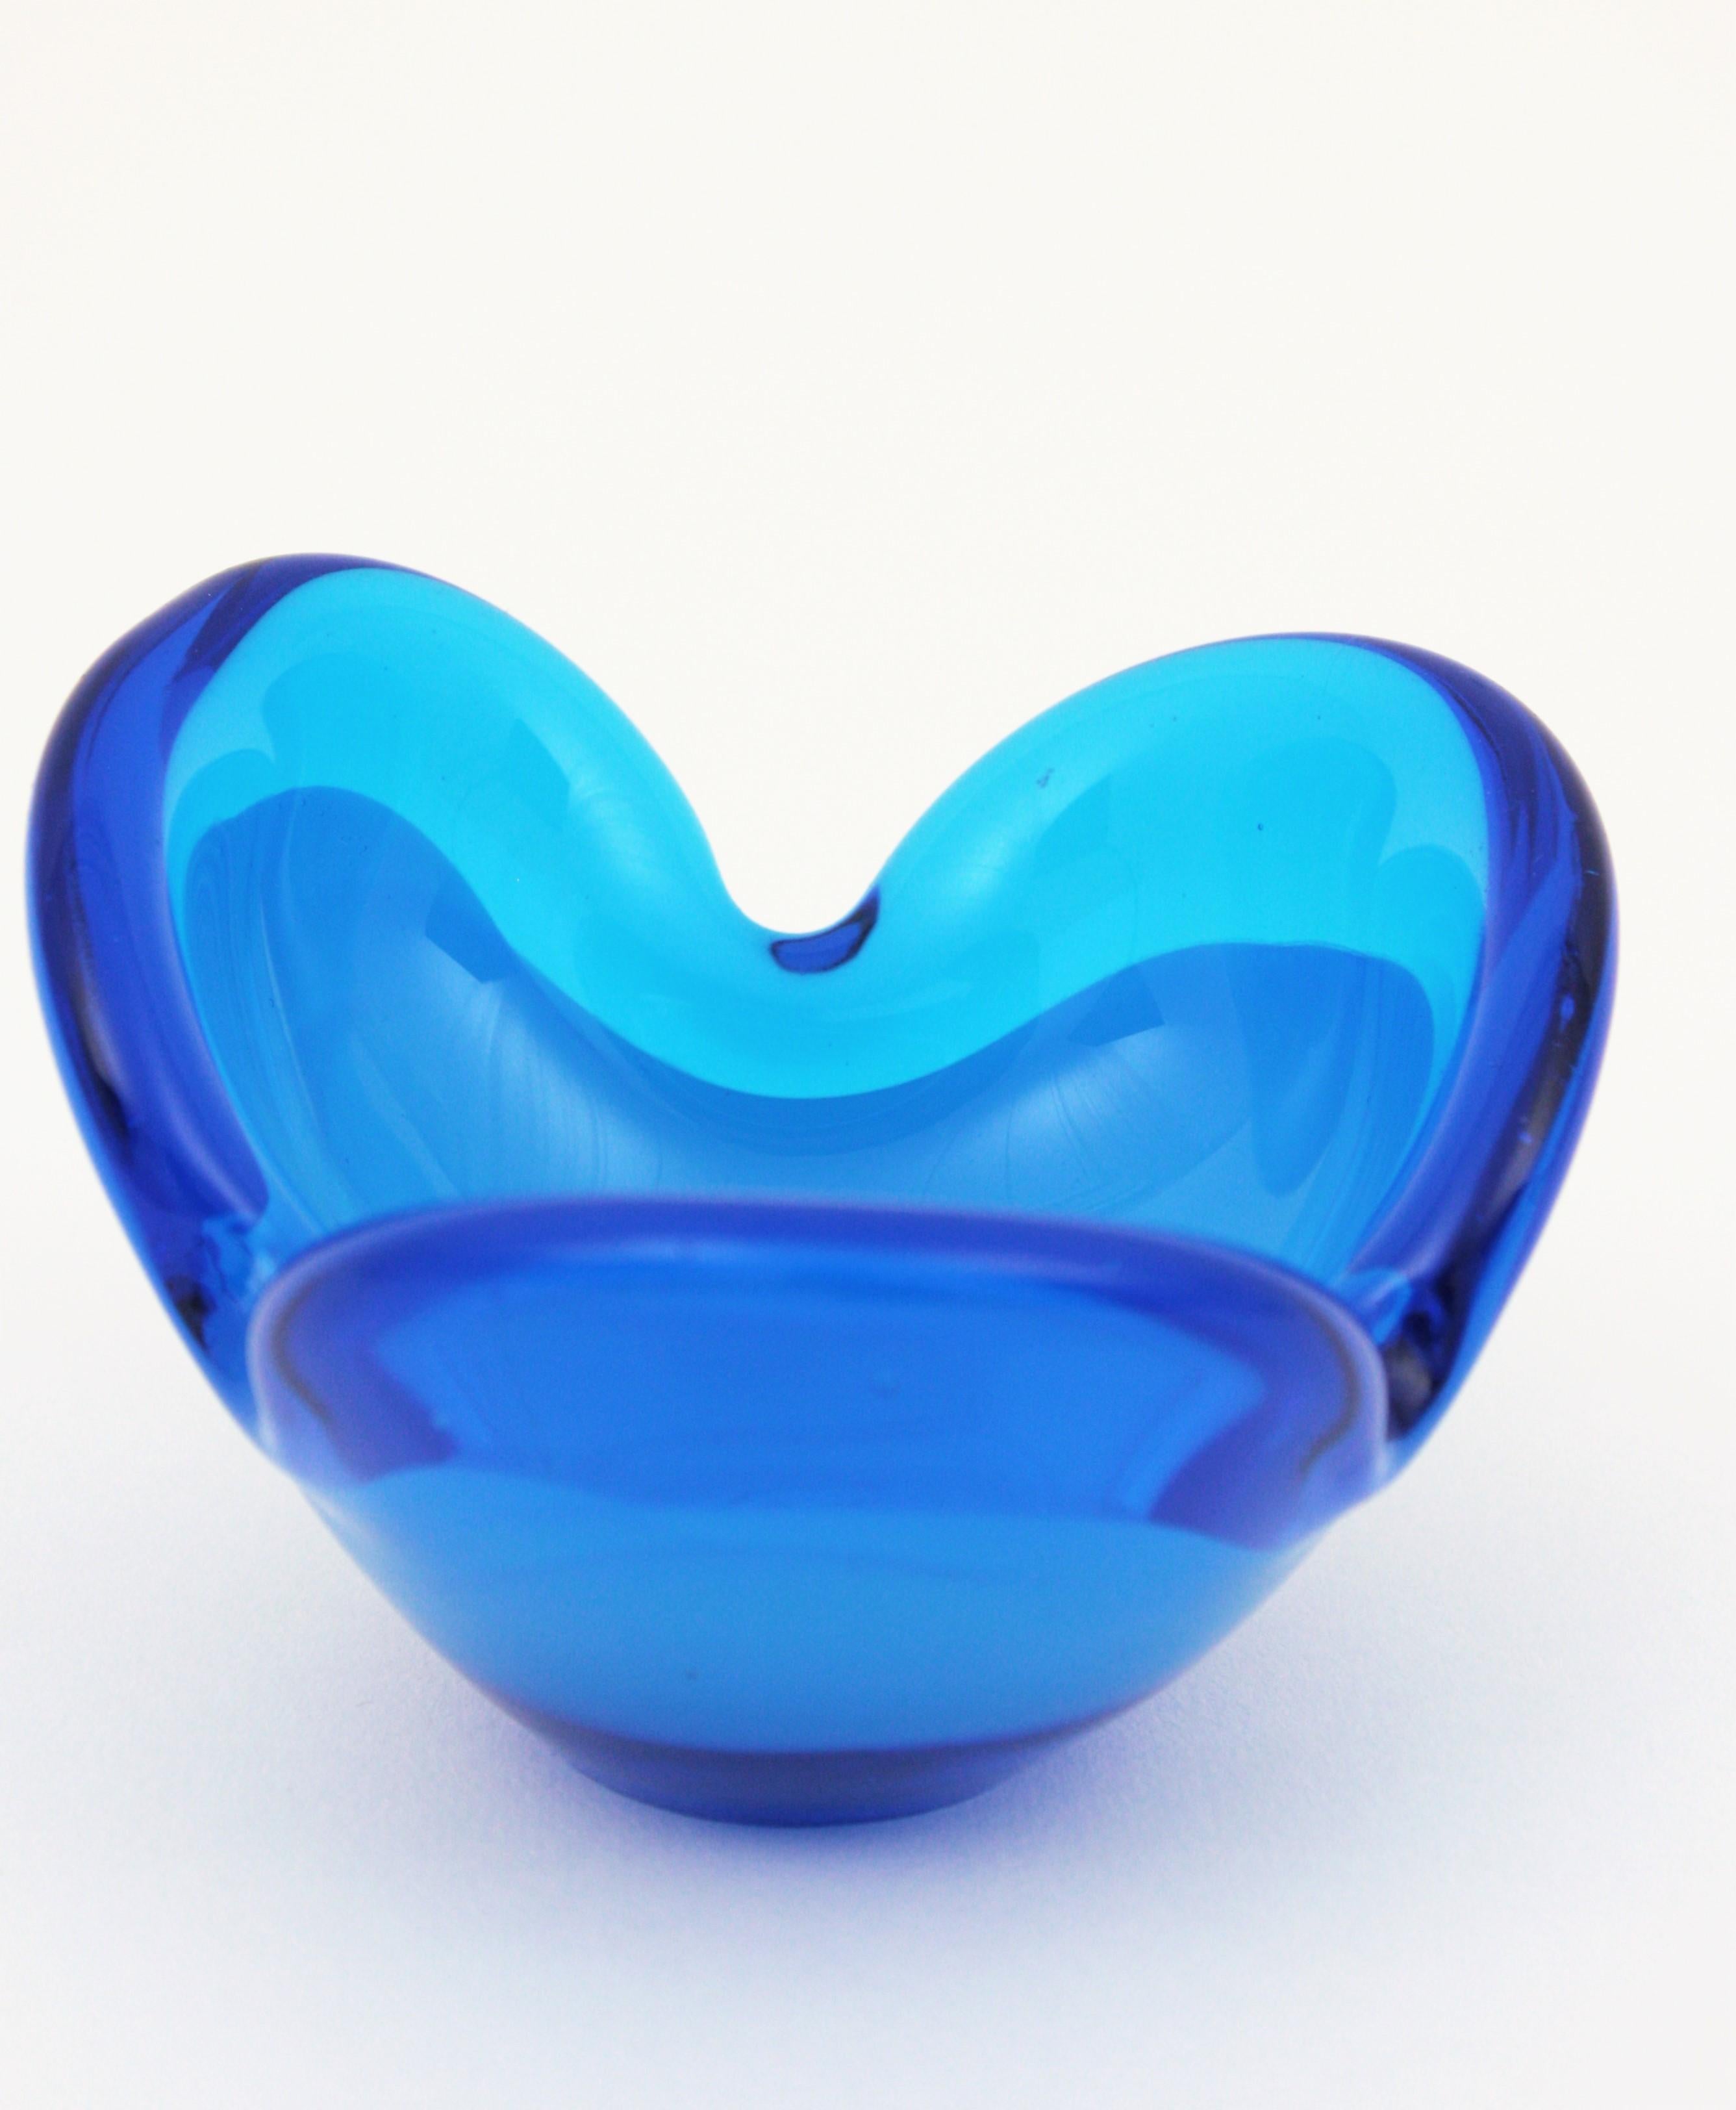 Seguso Murano Midcentury Blue Italian Art Glass Bowl In Excellent Condition For Sale In Barcelona, ES